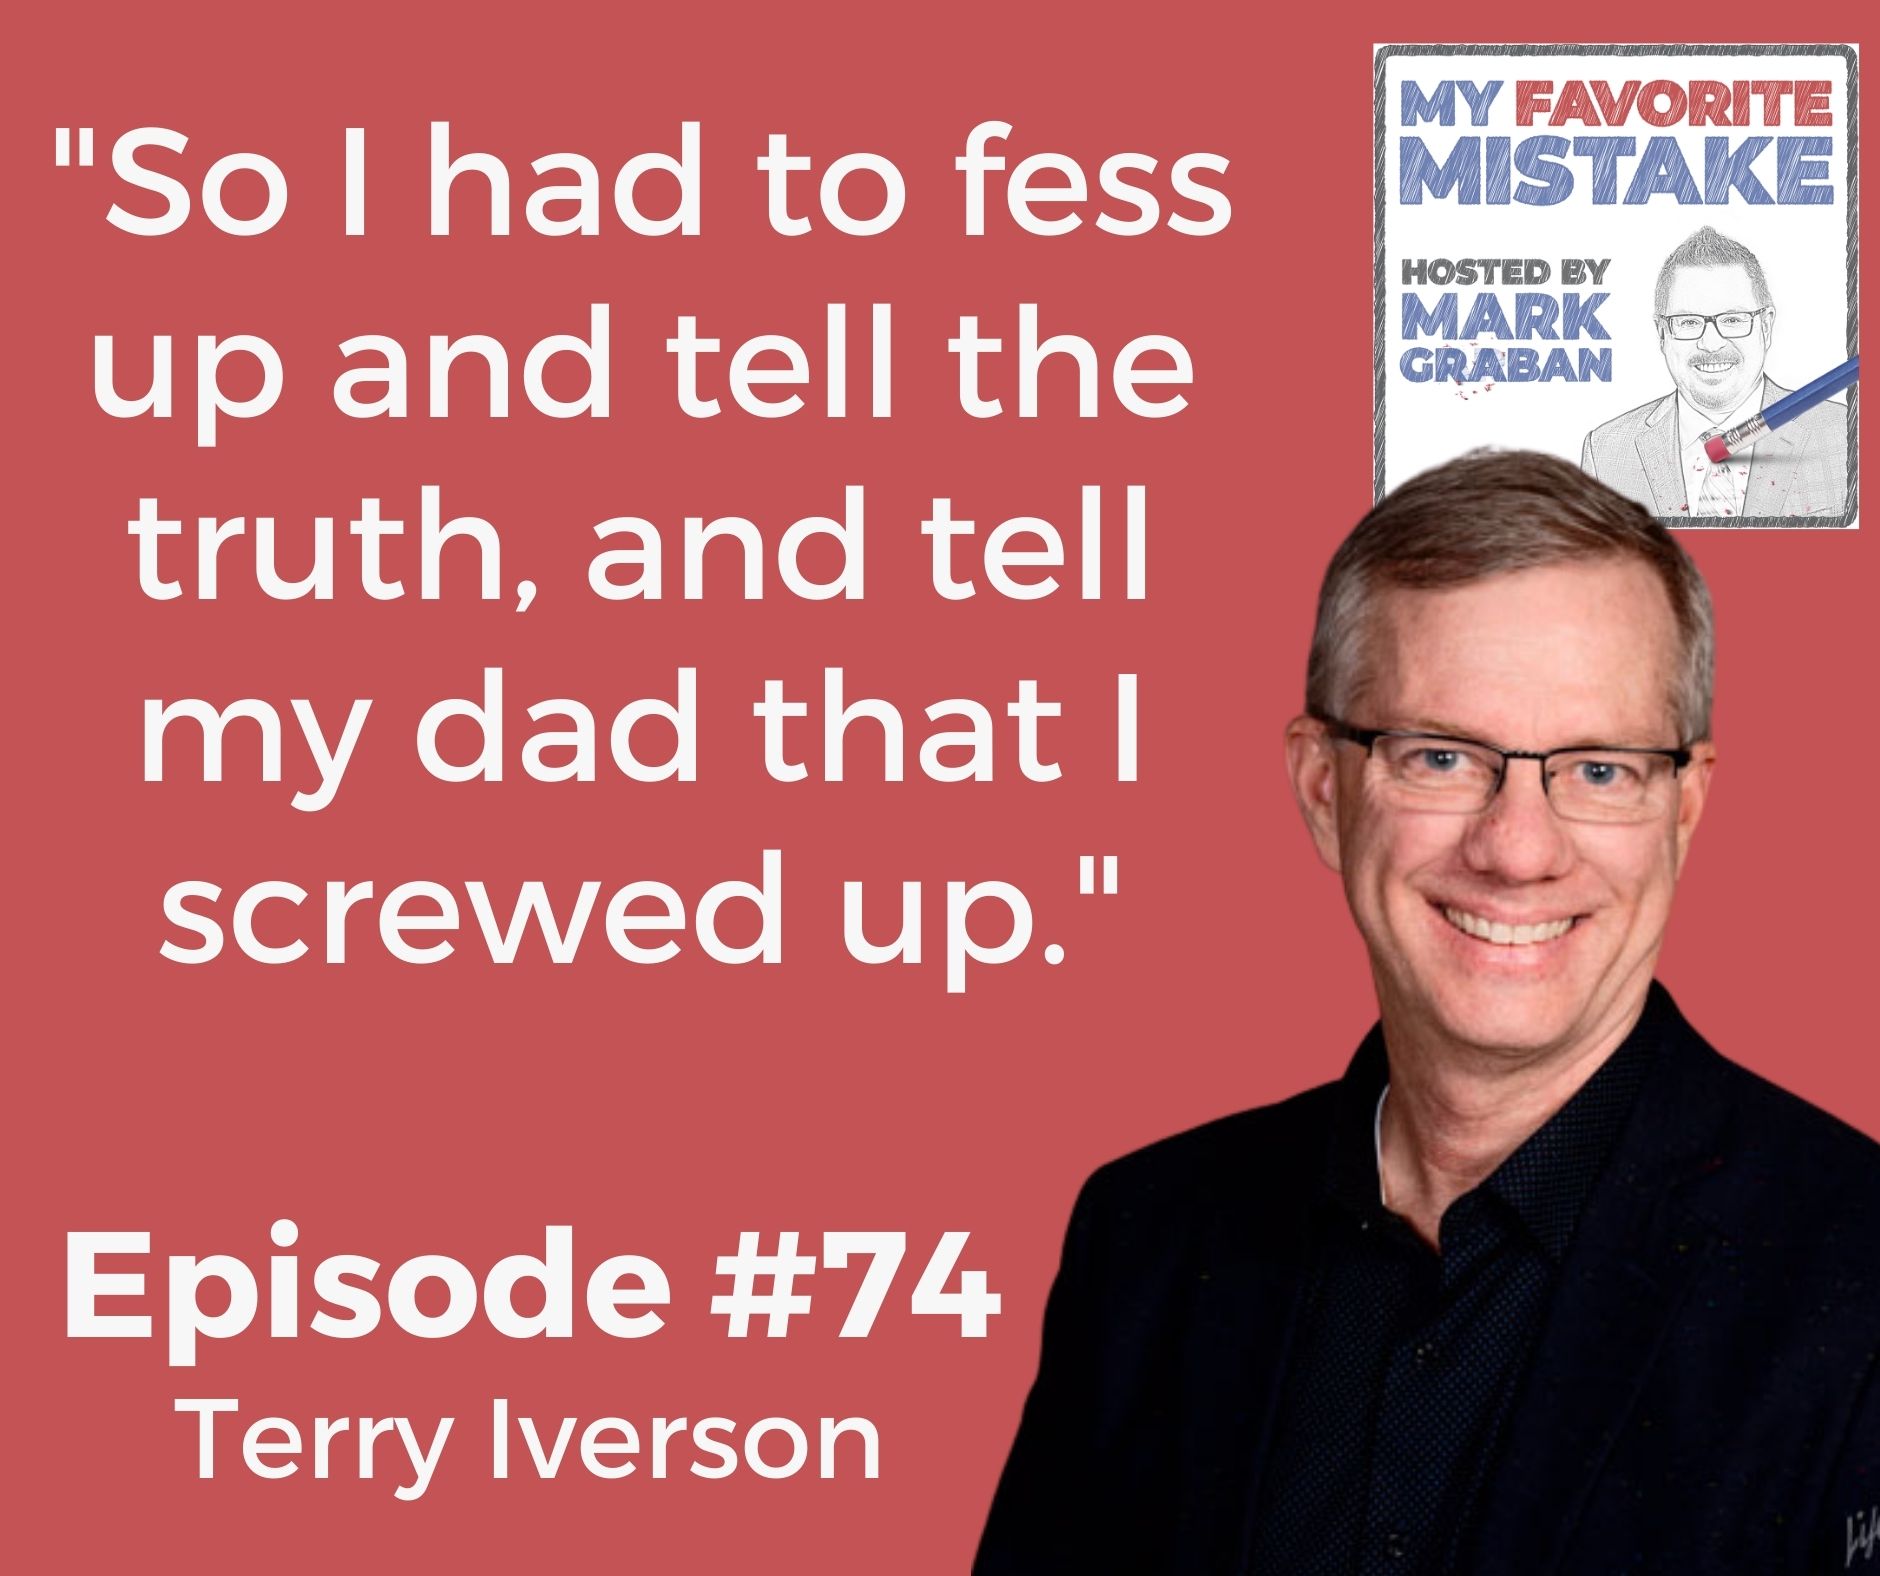 "So I had to fess up and tell the truth, and tell my dad that I screwed up."